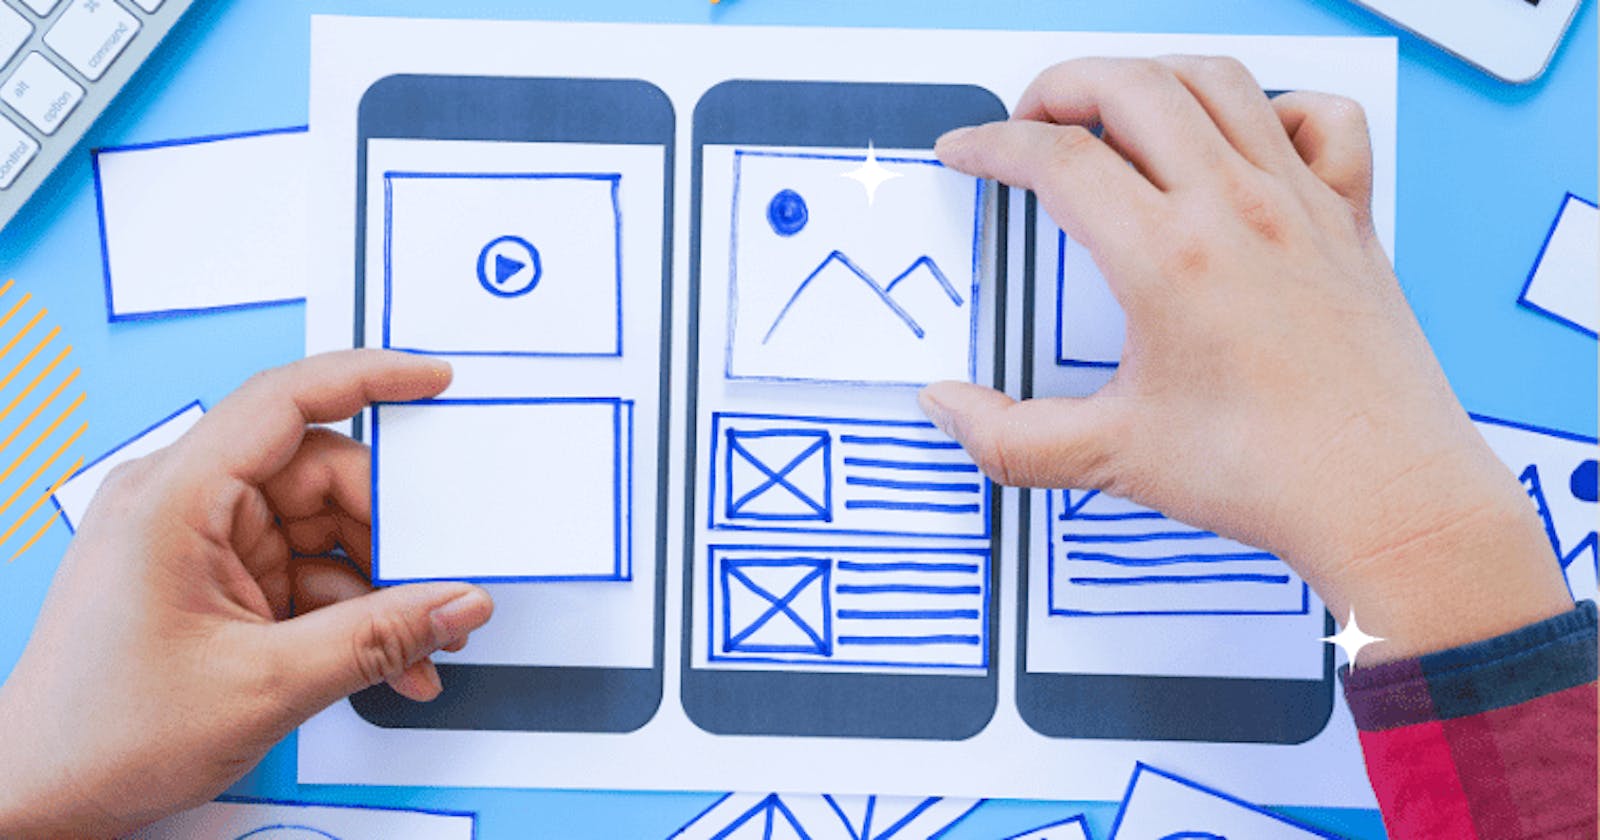 How to Create a Mobile App Wireframe in 10 Steps?